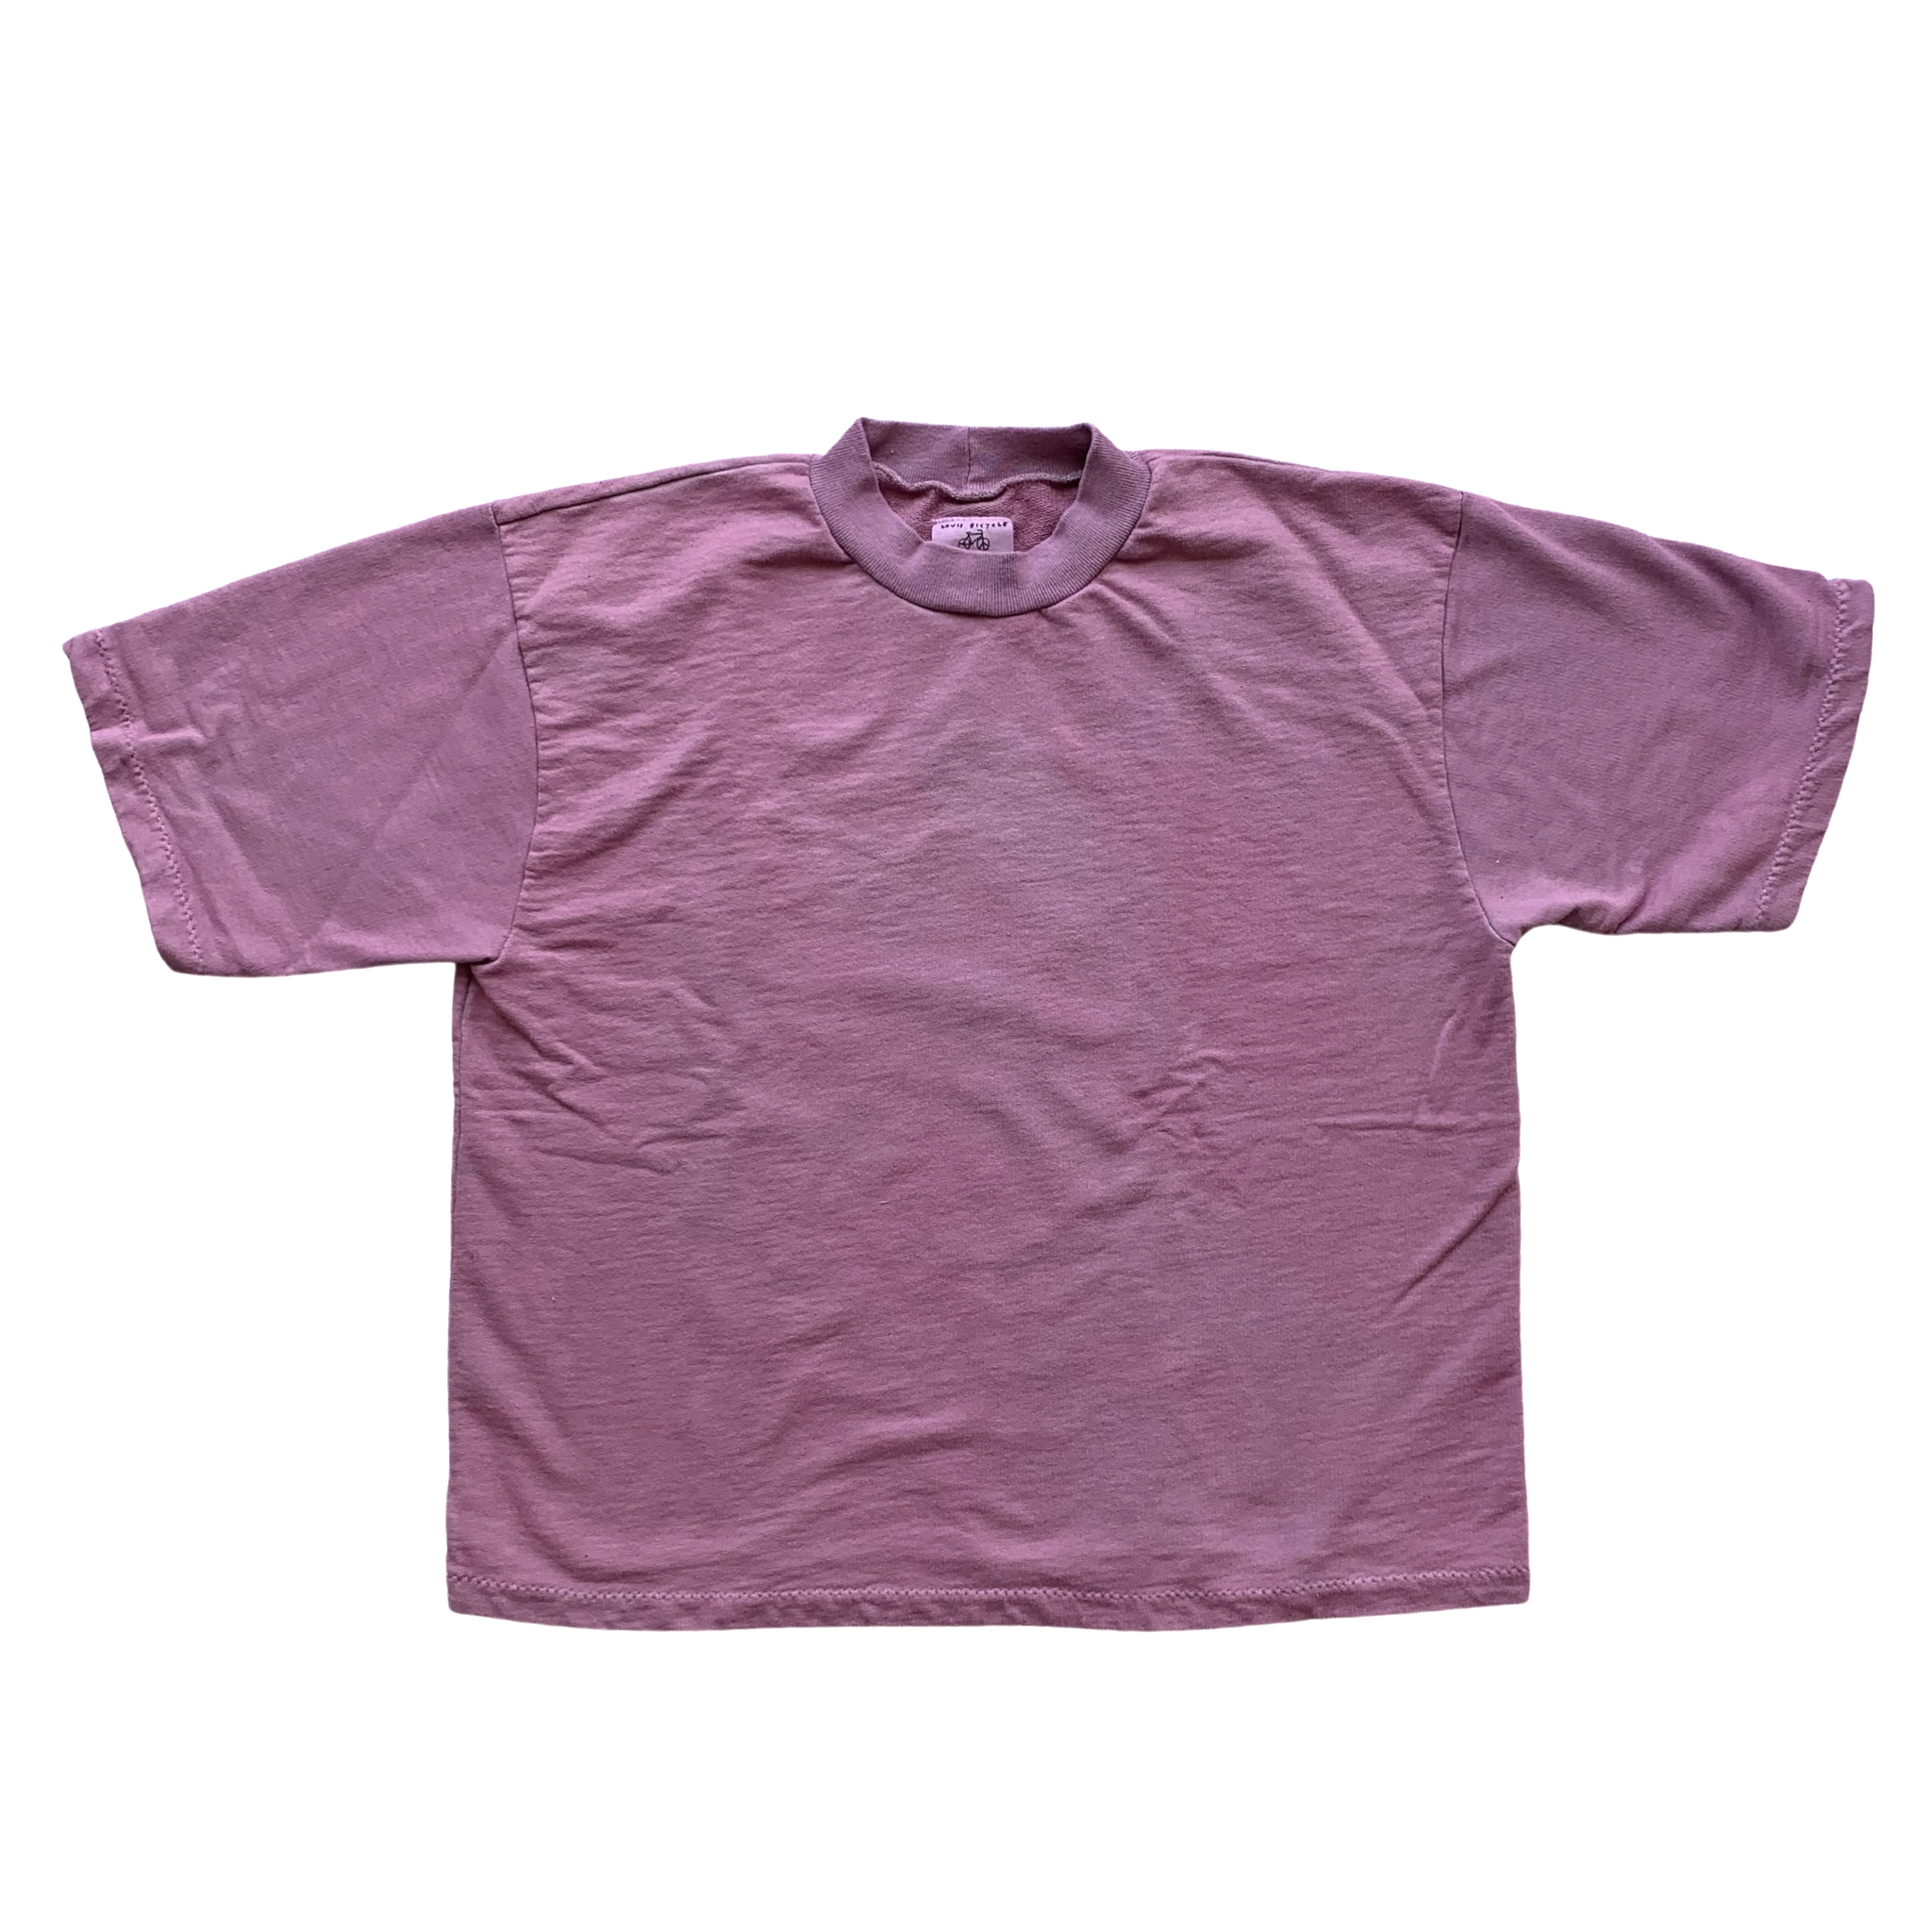 french terry heavy tee - organic usa cotton - garment dyed - M SHORT